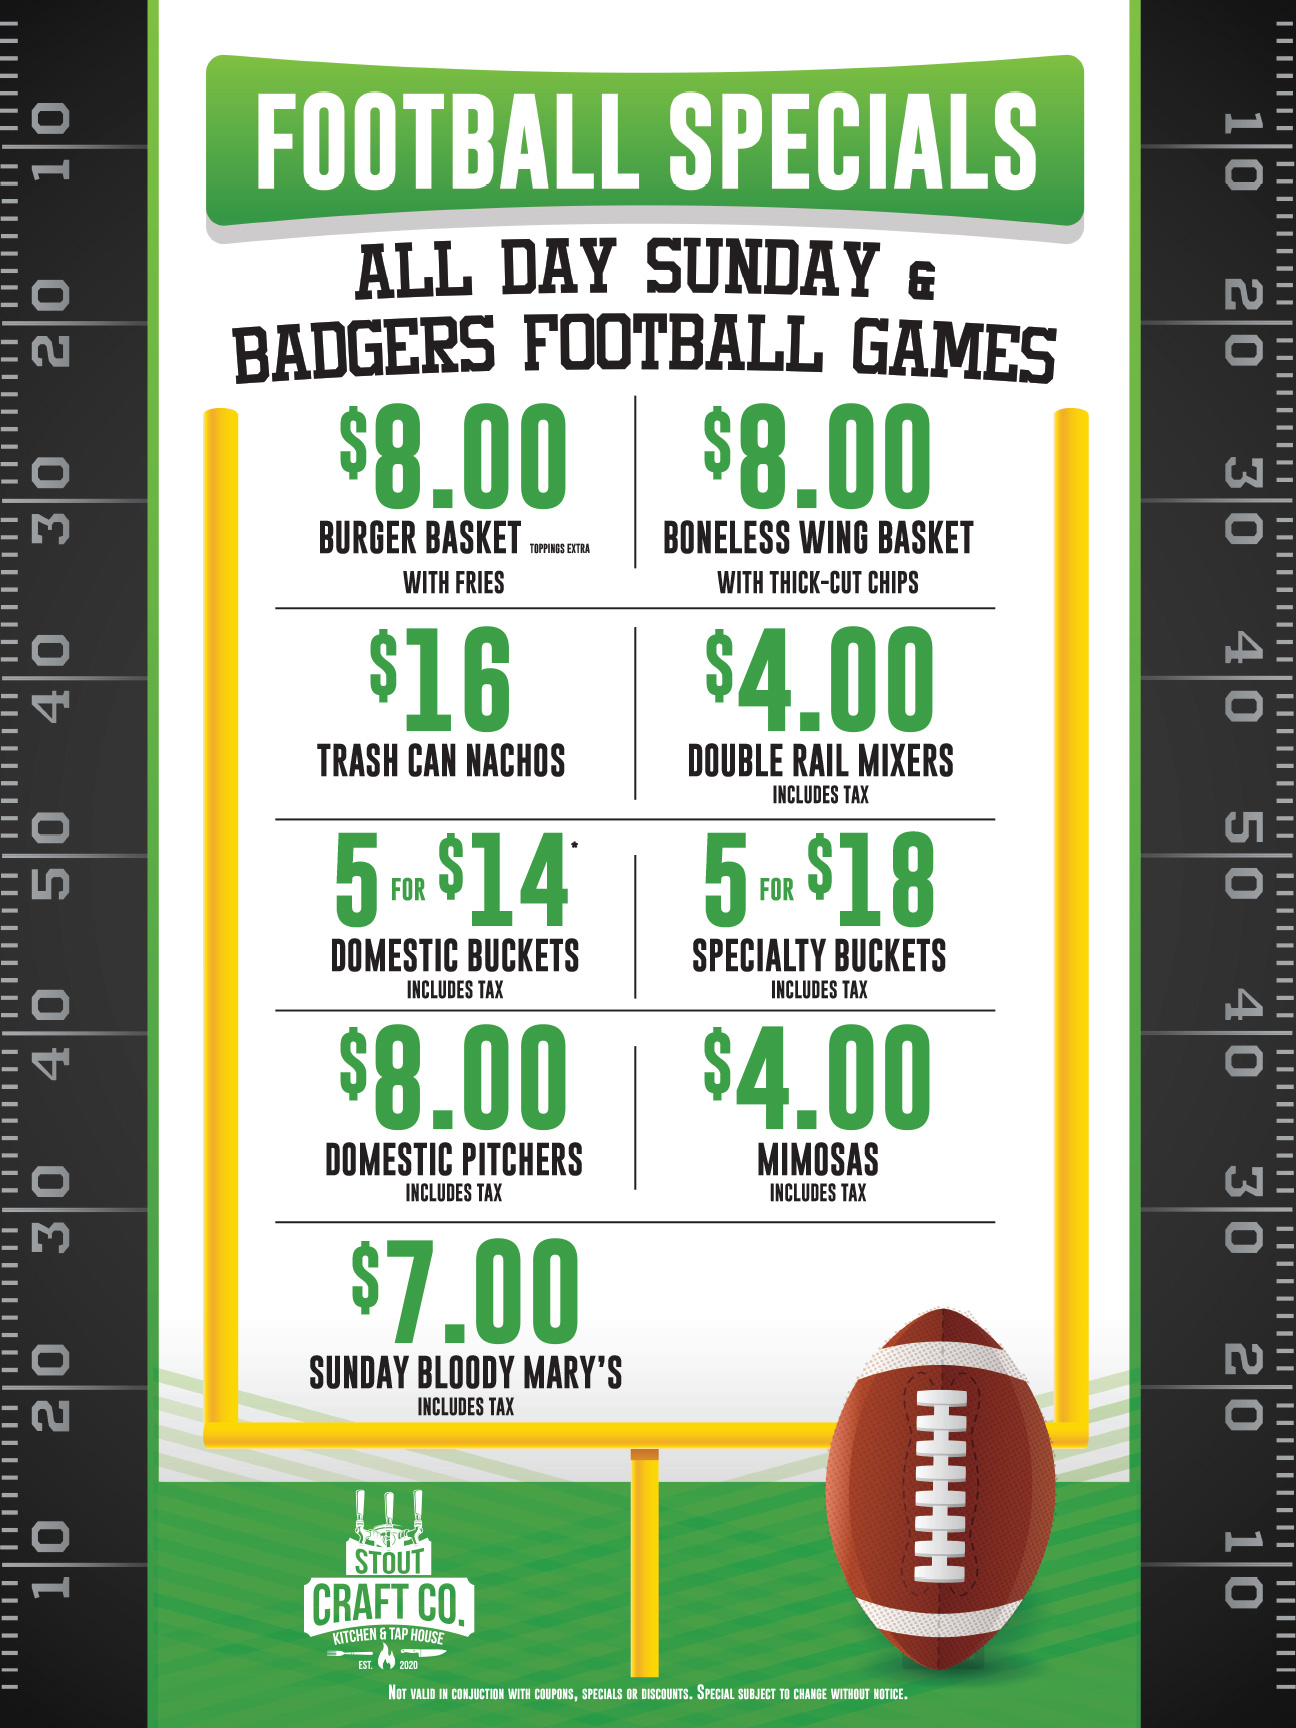 Sunday Specials and Badger Games